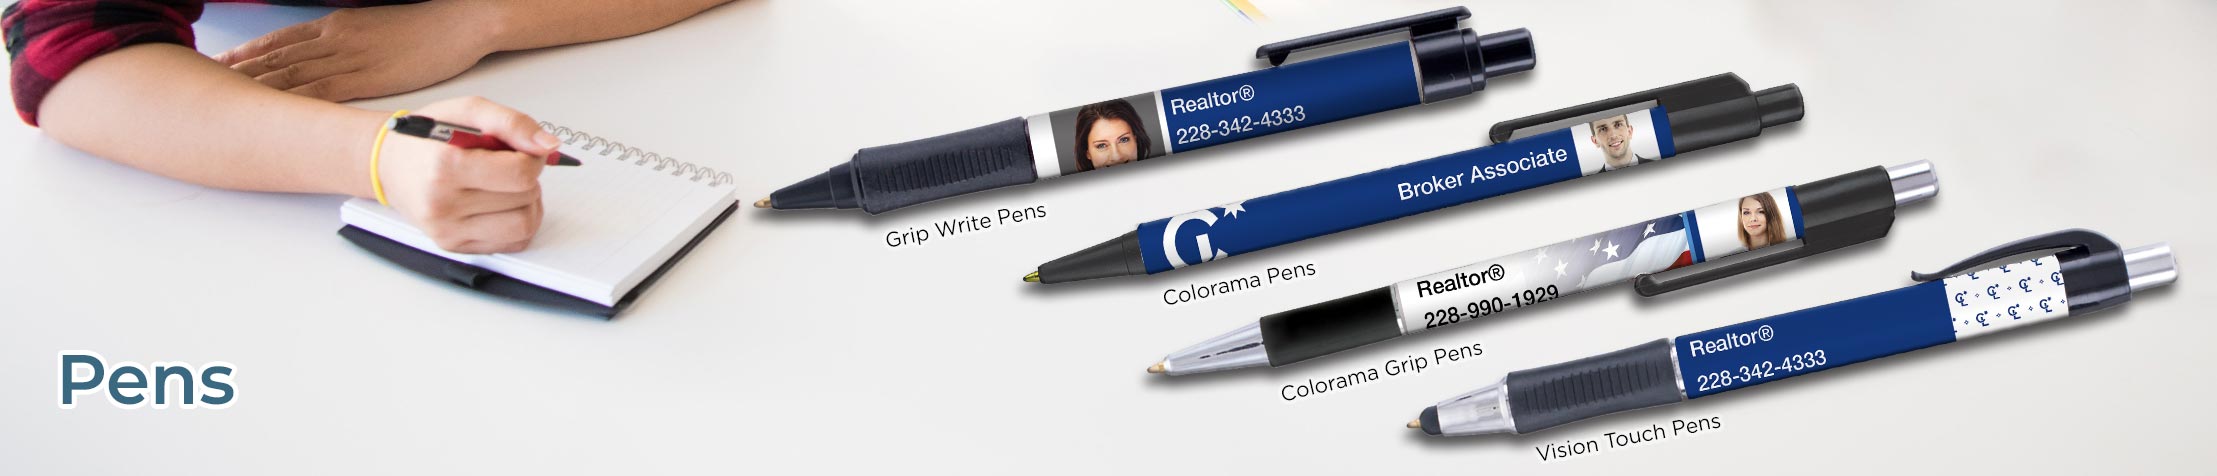 Coldwell Banker Real Estate Personalized Pens - promotional products: Grip Write Pens, Colorama Pens, Vision Touch Pens, and Colorama Grip Pens | BestPrintBuy.com